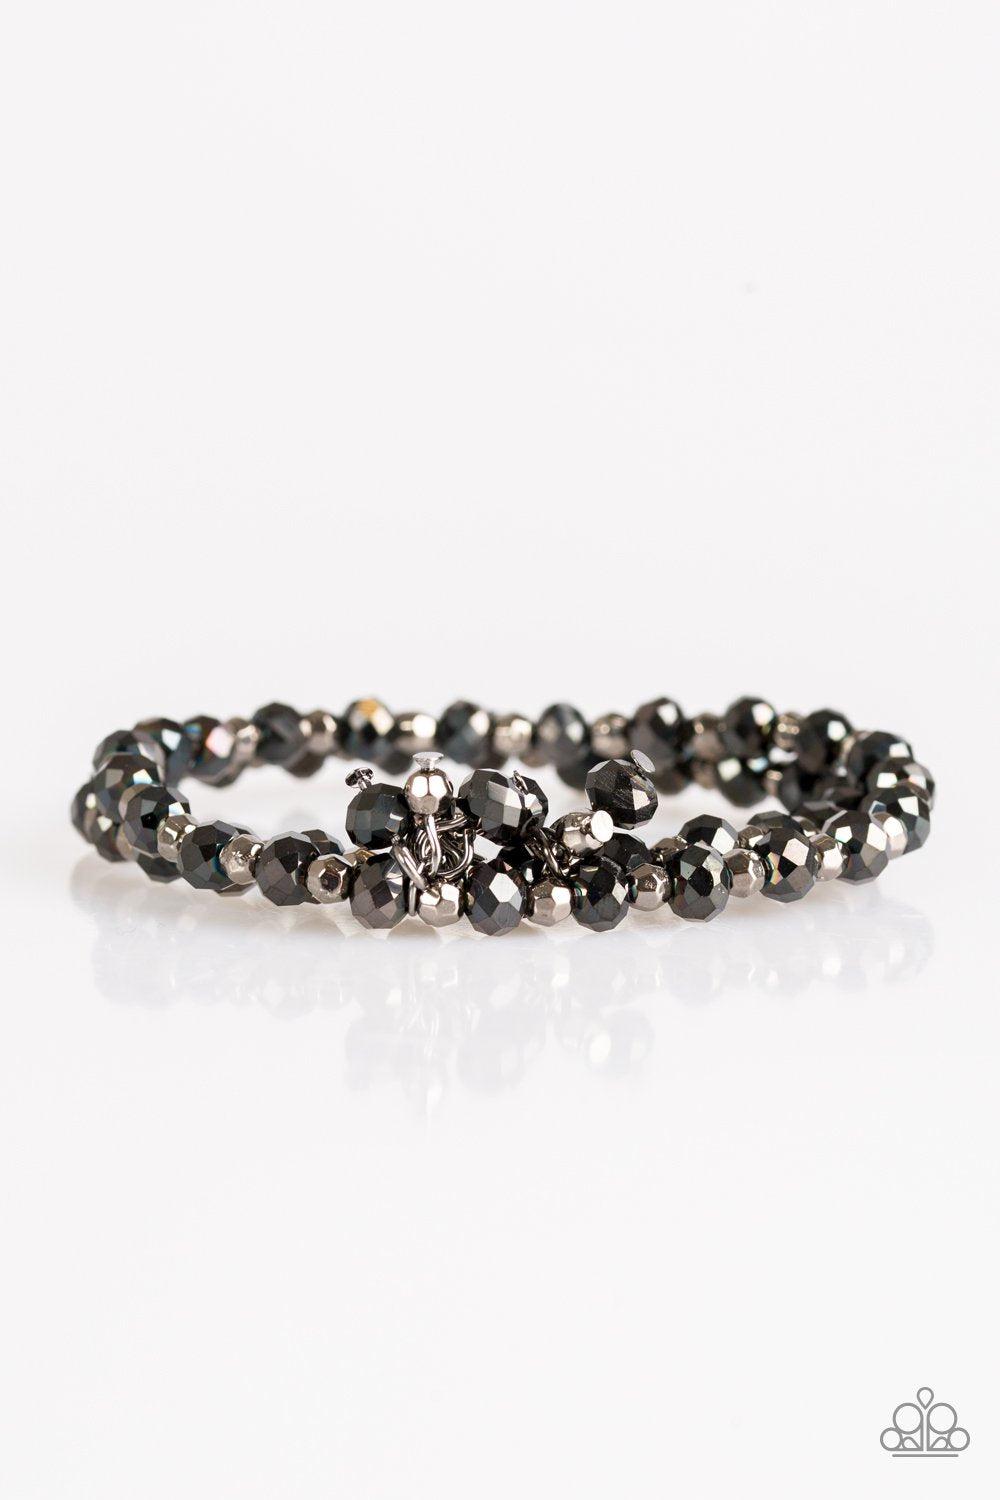 Sink Or Shimmer Black Bracelet Set - Paparazzi Accessories-CarasShop.com - $5 Jewelry by Cara Jewels